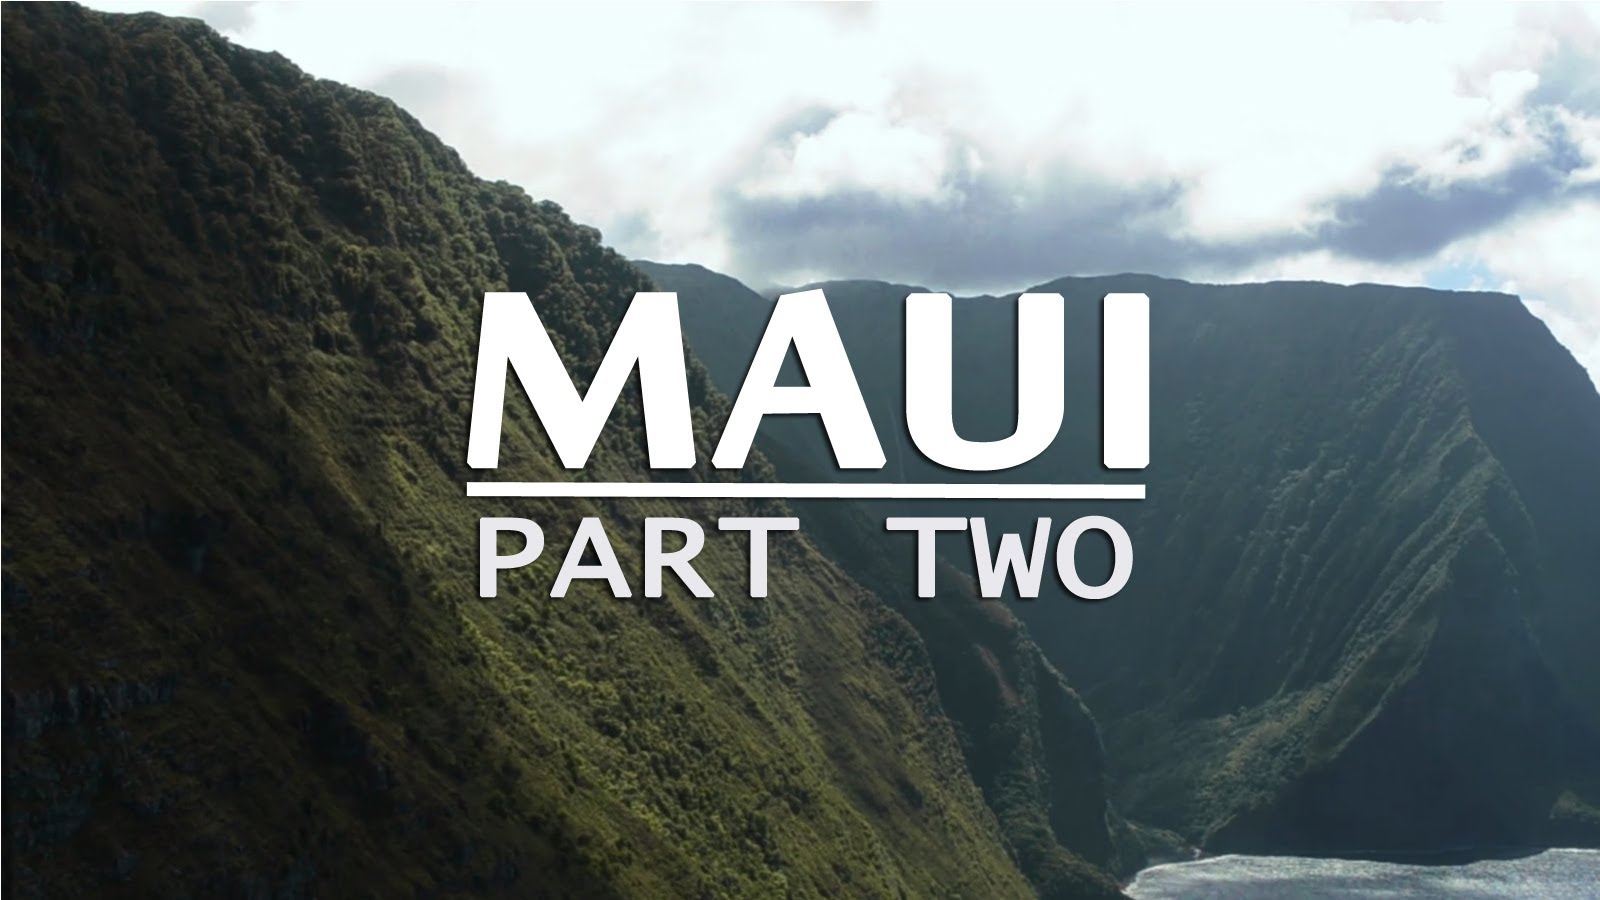 Travel Guide to Maui, Hawaii (Part 2)